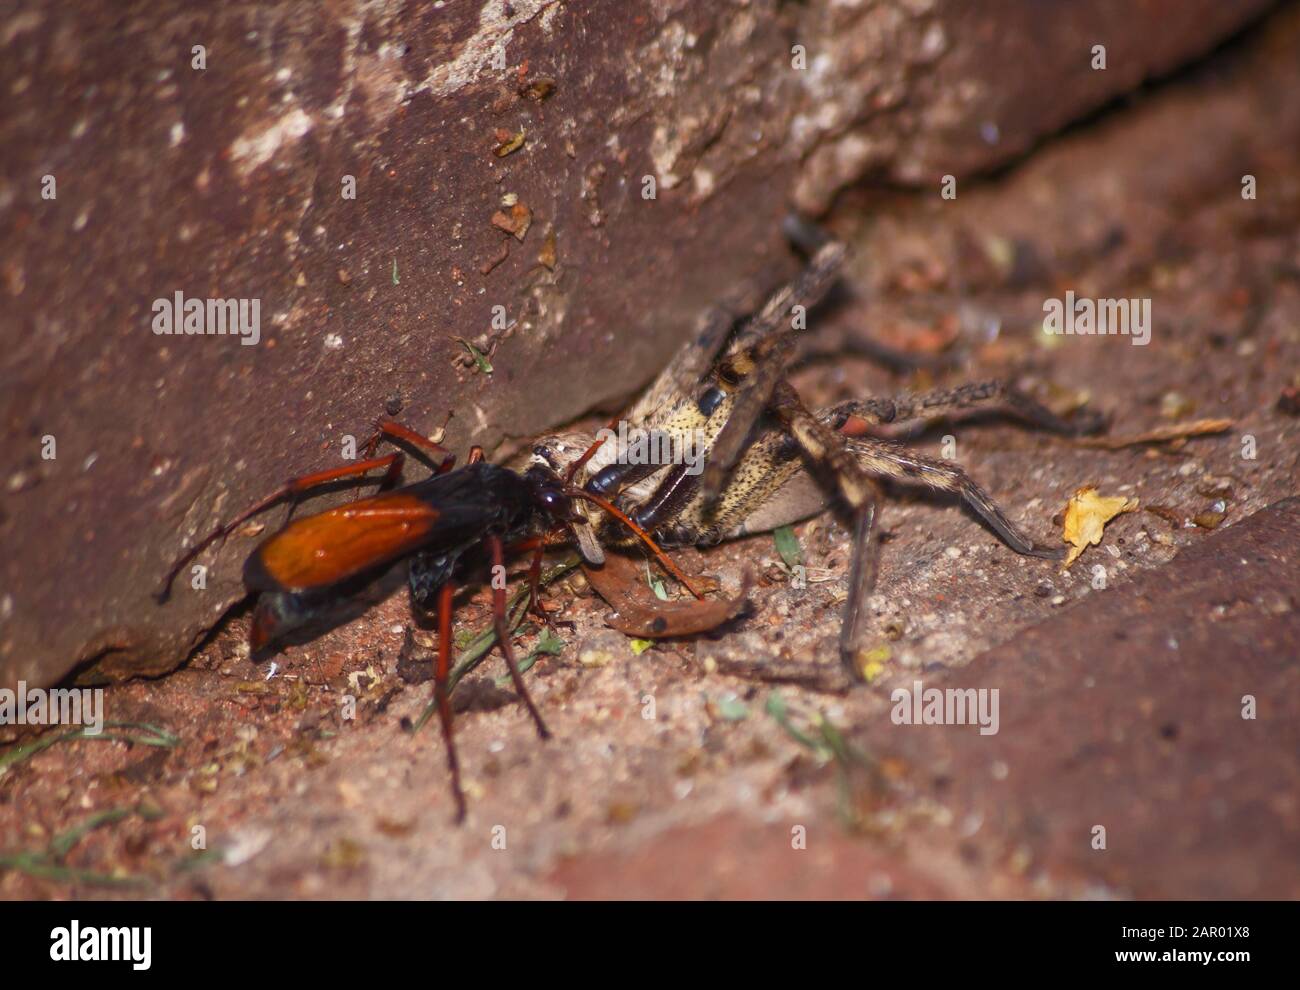 Spider eating wasp, Pompilidae Sp. with it's Rain Spider ( Palystes superciliosus) prey 9 Stock Photo